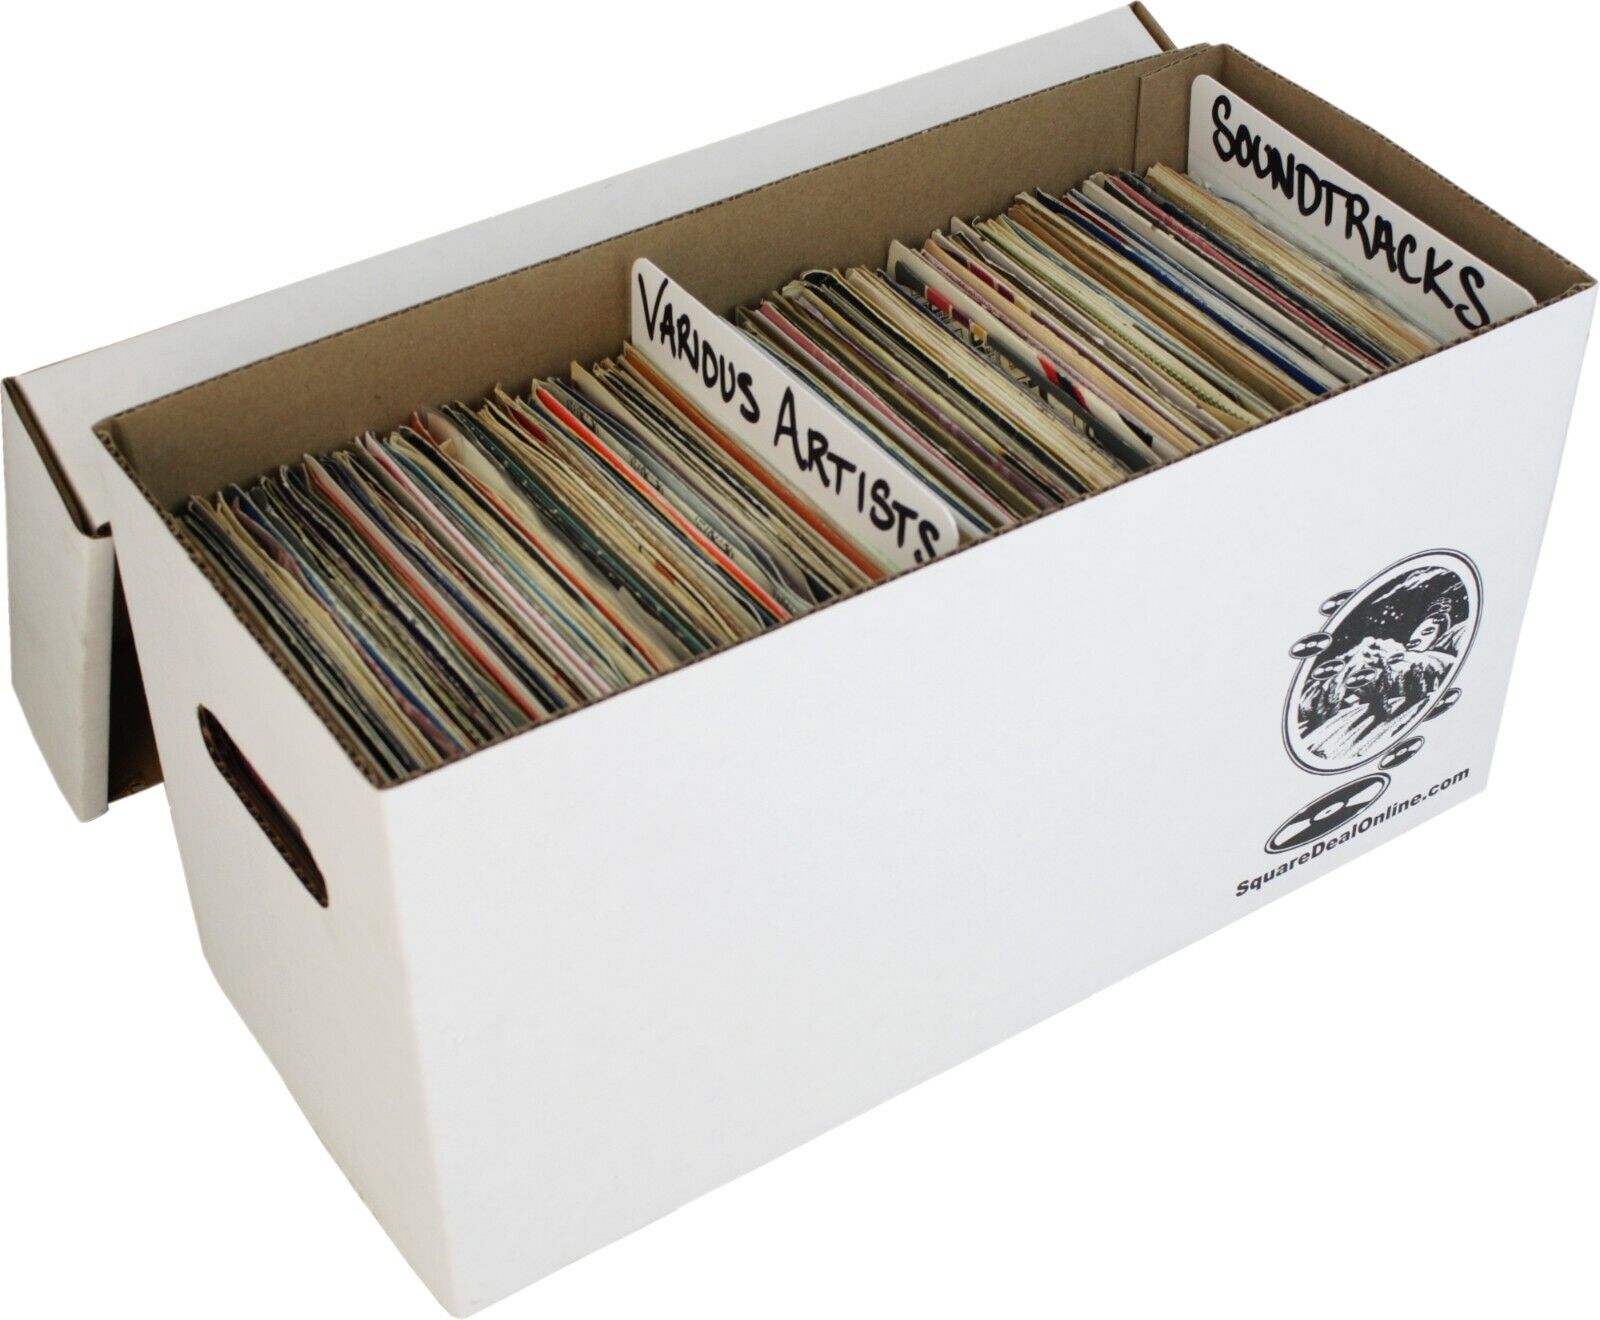 (5) 7" White Record Boxes with Lids - Vinyl Singles 45rpm Cardboard Storage Square Deal Recordings & Supplies 07BC09 - фотография #5